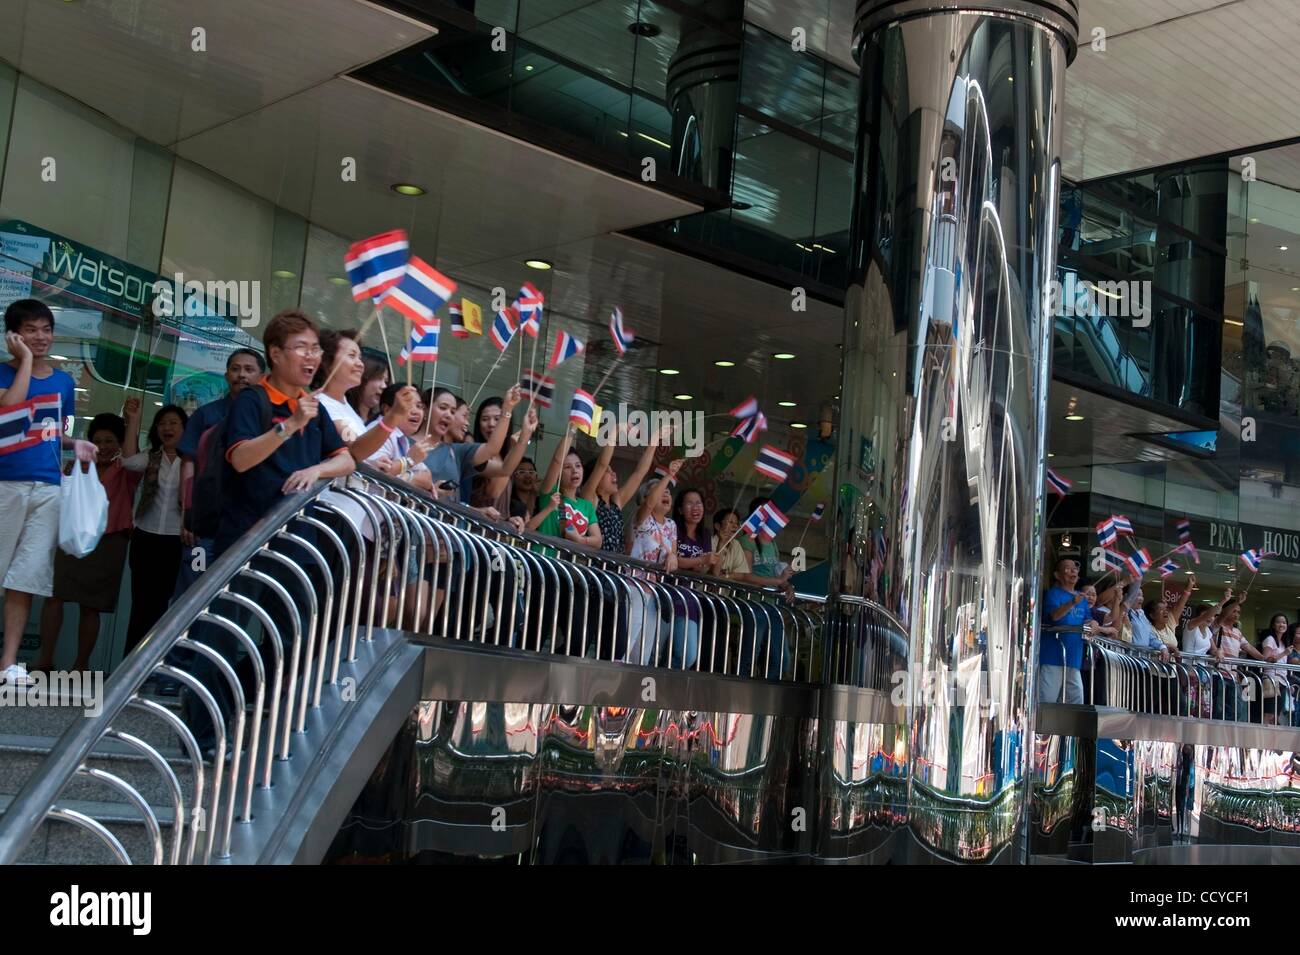 Apr 19, 2010 - Bangkok, Thailand - People wave Thai flags distributed by the 'No Color Shirts' campaign in support of the governemnt  during the massing of forces to secure Bangkok's financial district. Thai Army and Thai Royal Police have been deployed to the financial district to safe guard it as  Stock Photo